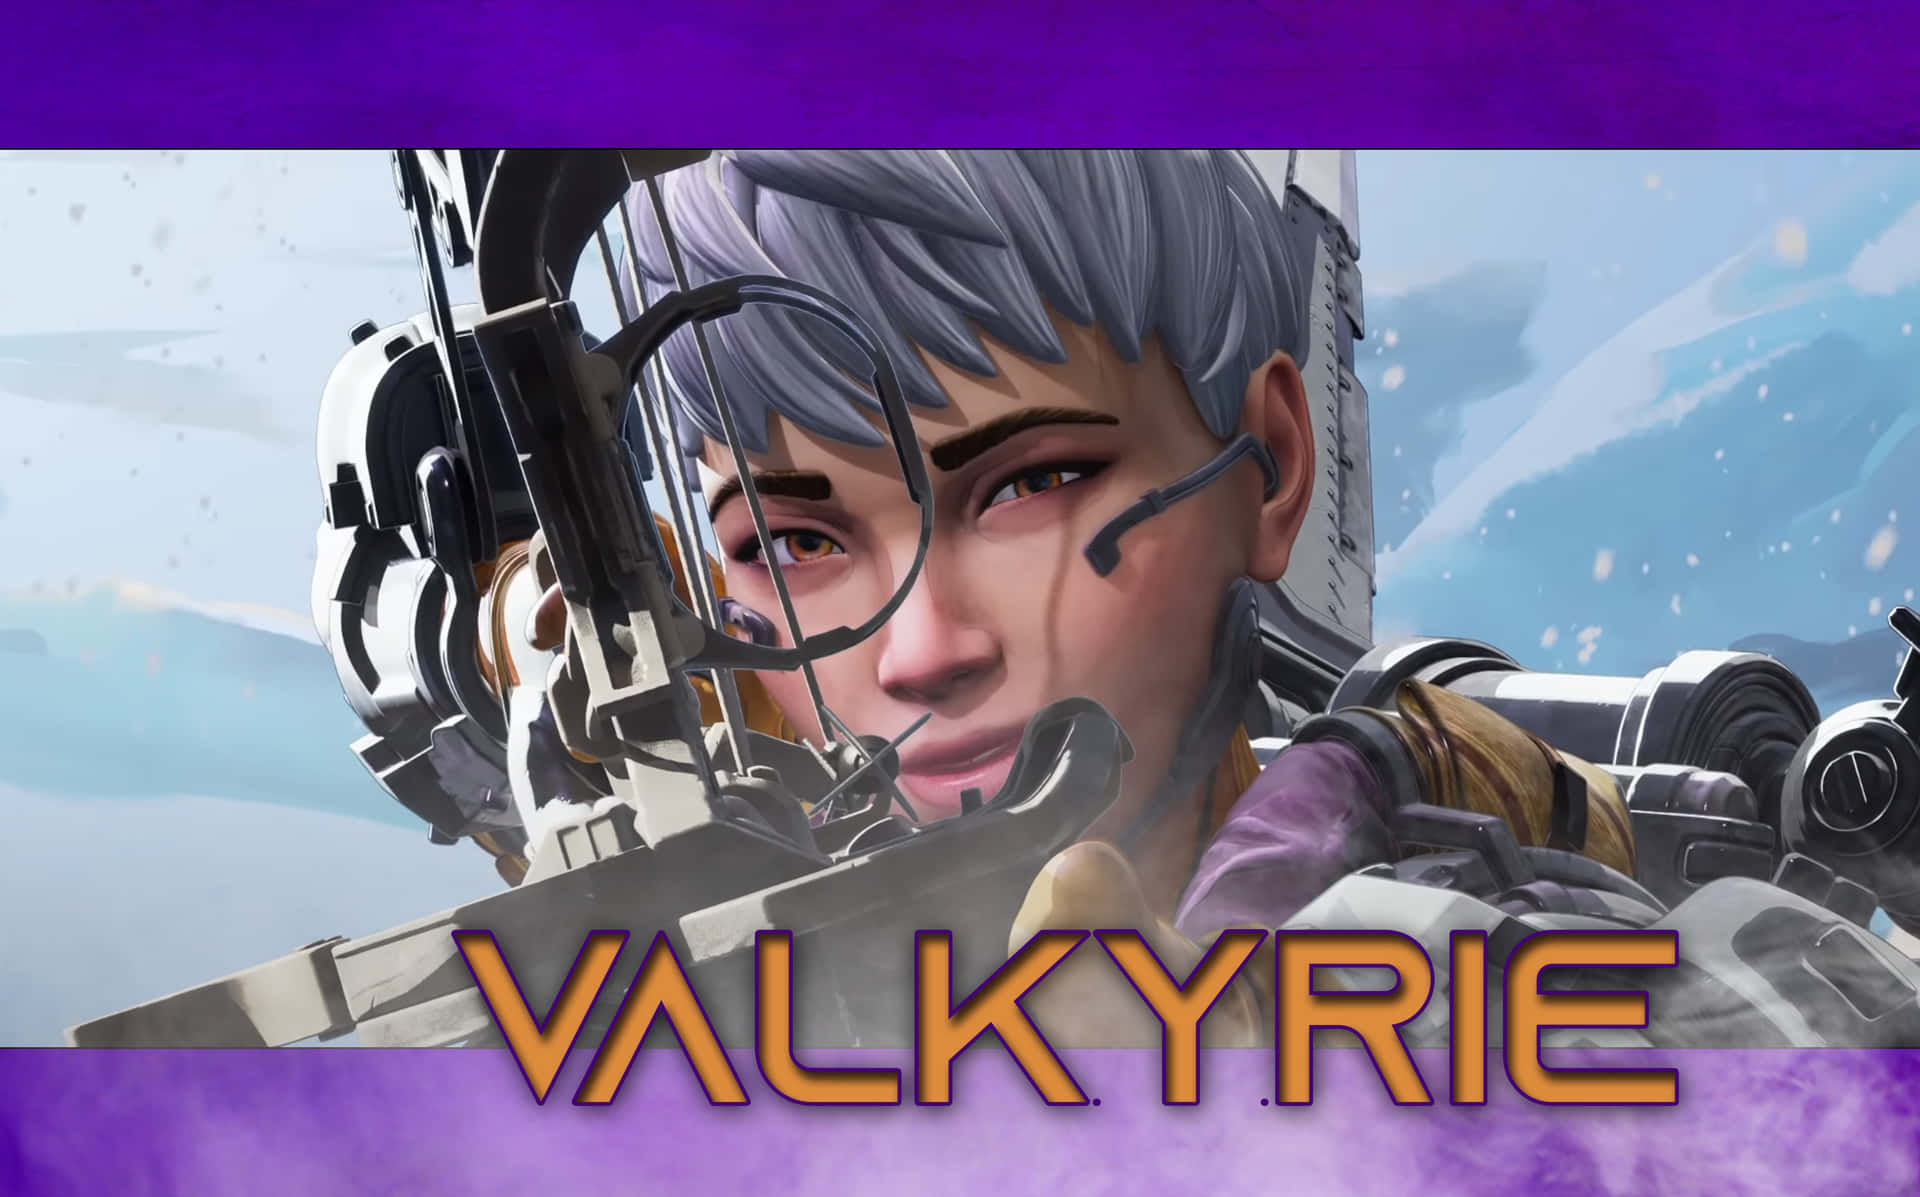 Aiming Valkyrie Apex Legends Poster Wallpaper